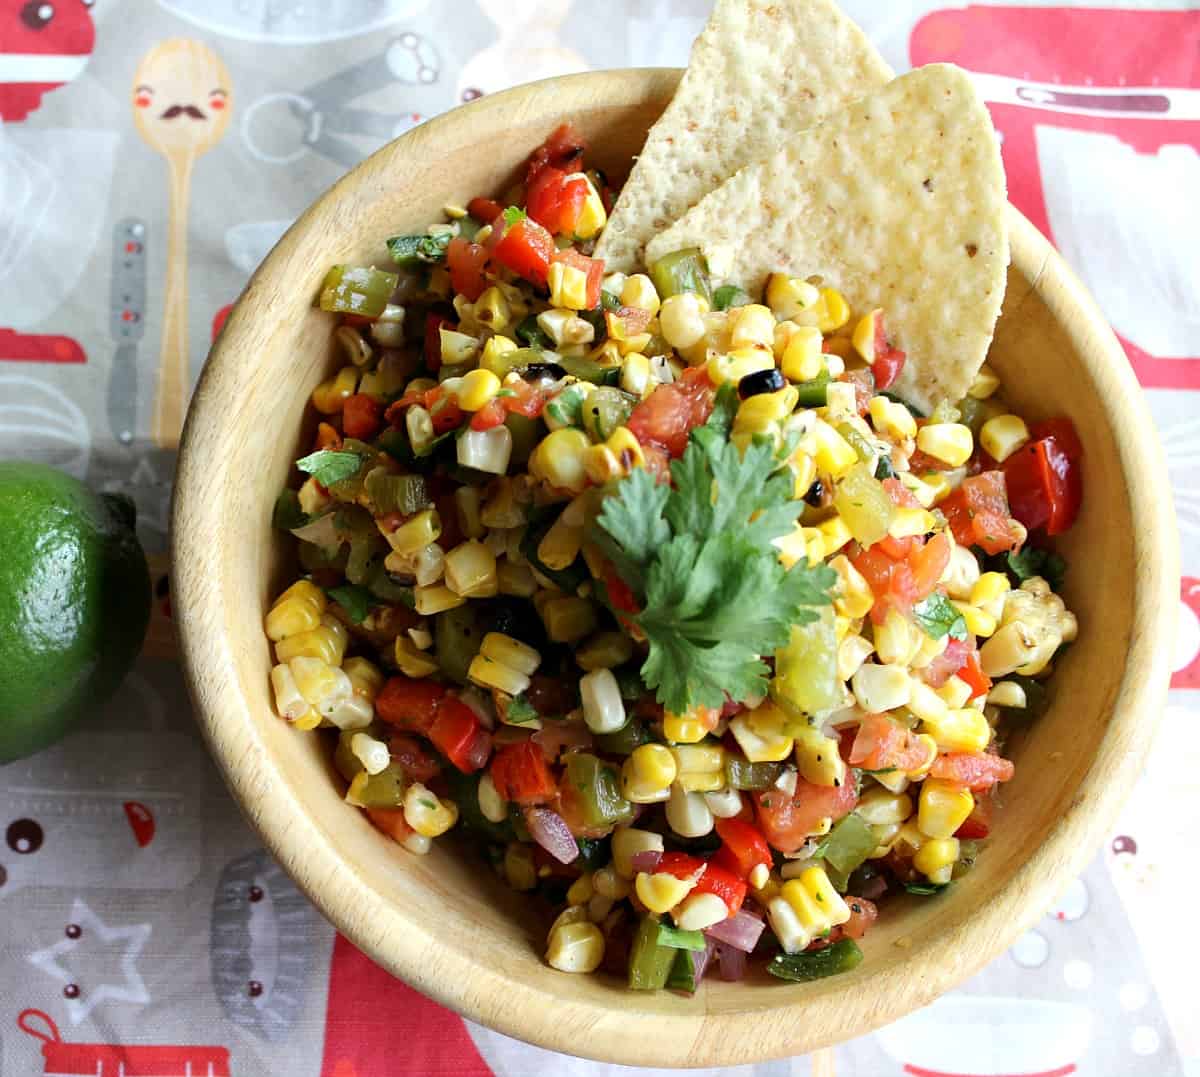 Wooden bowl holding corn and veggie salsa.